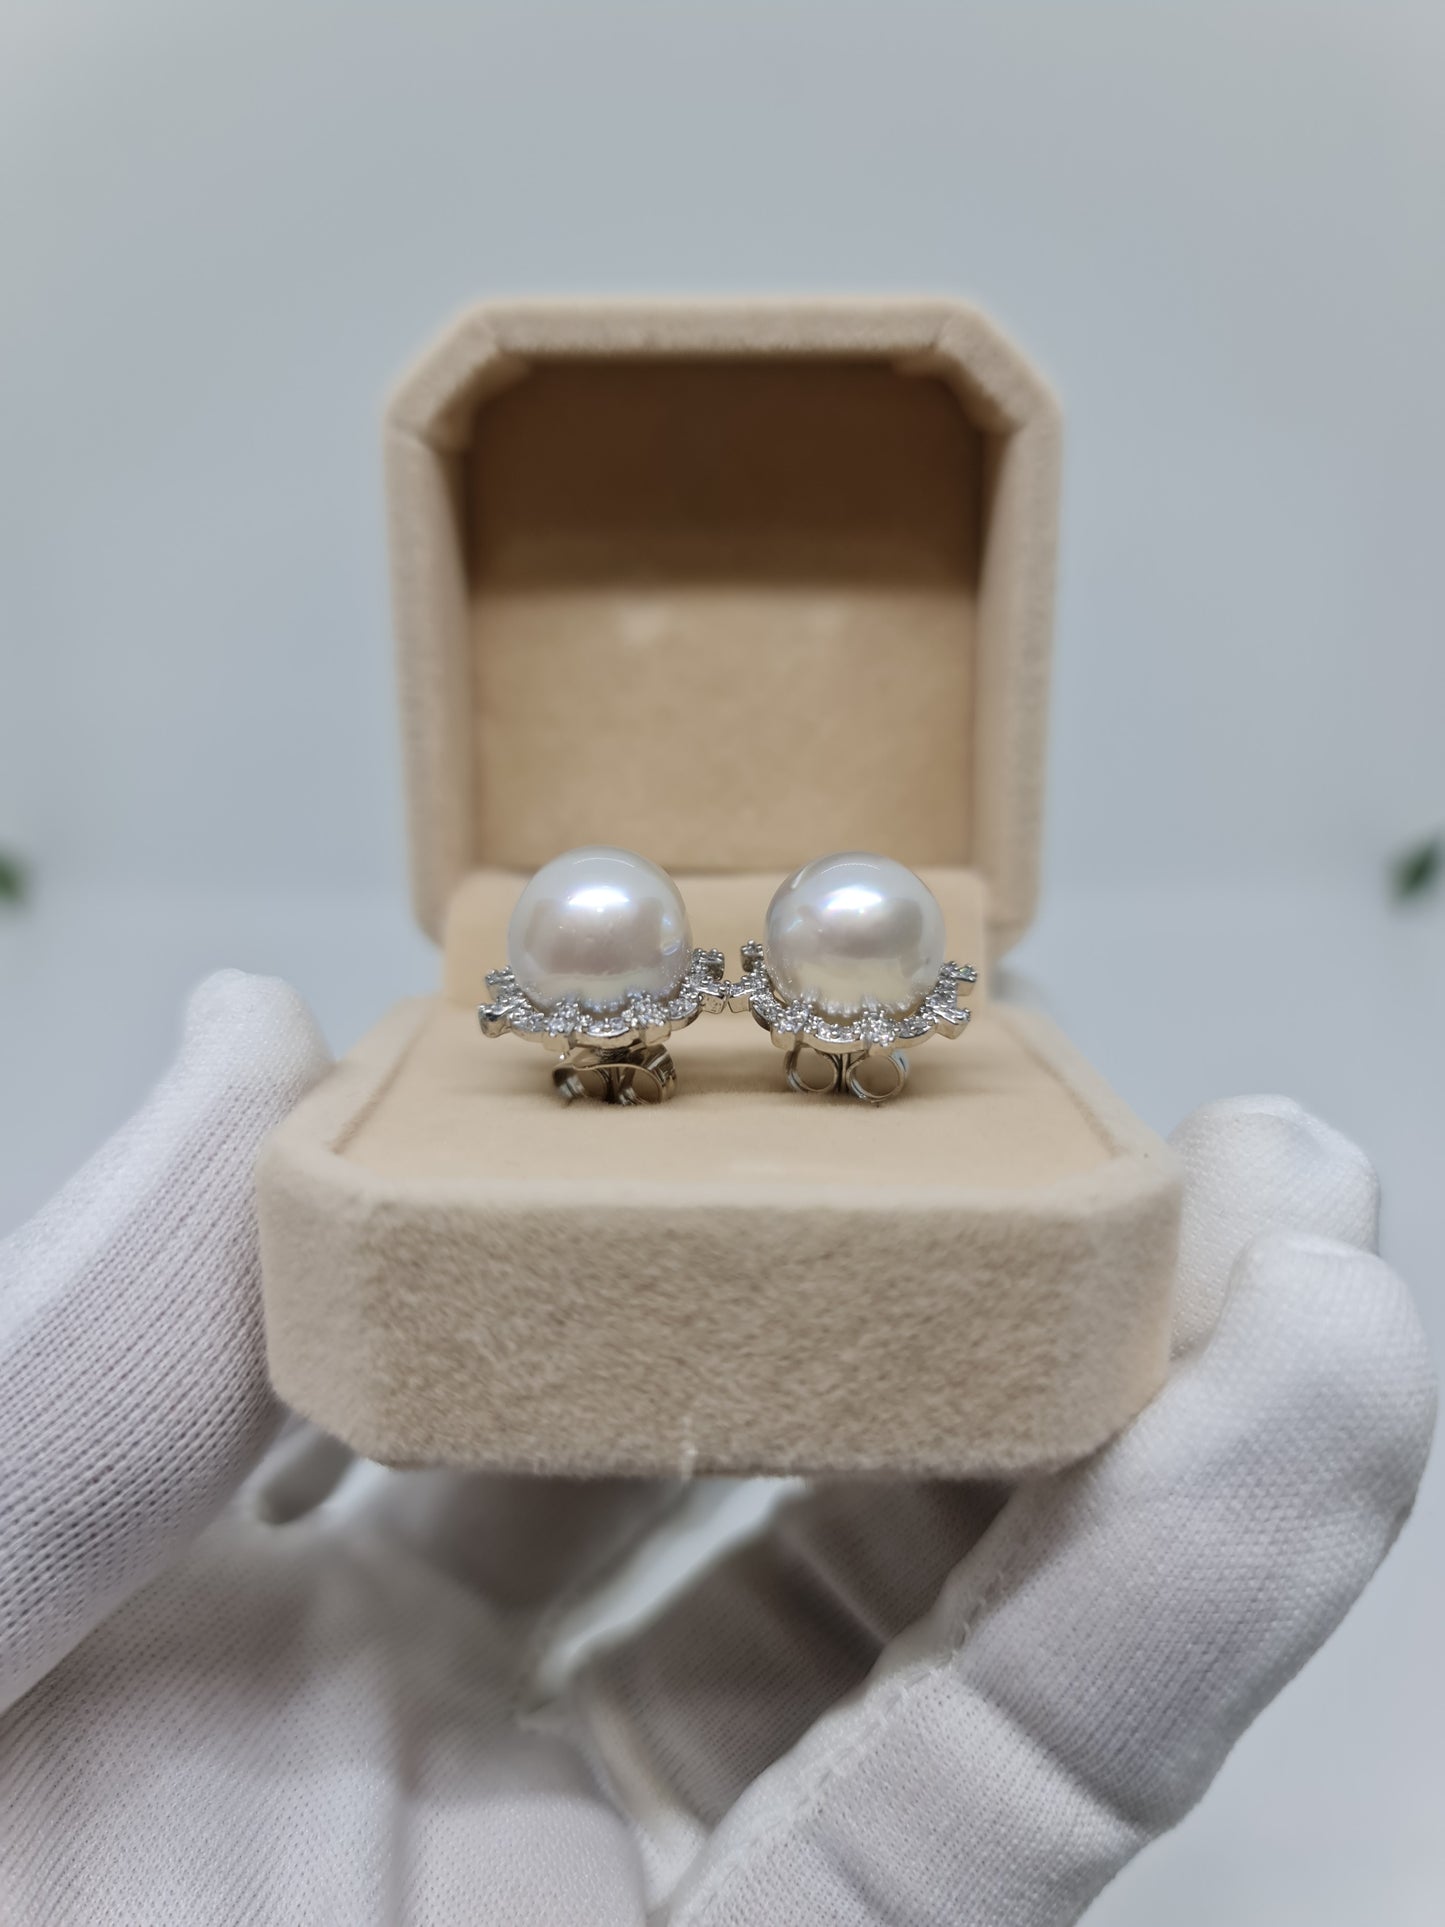 11.5mm Silver South Sea Pearls Earrings Plated Settings